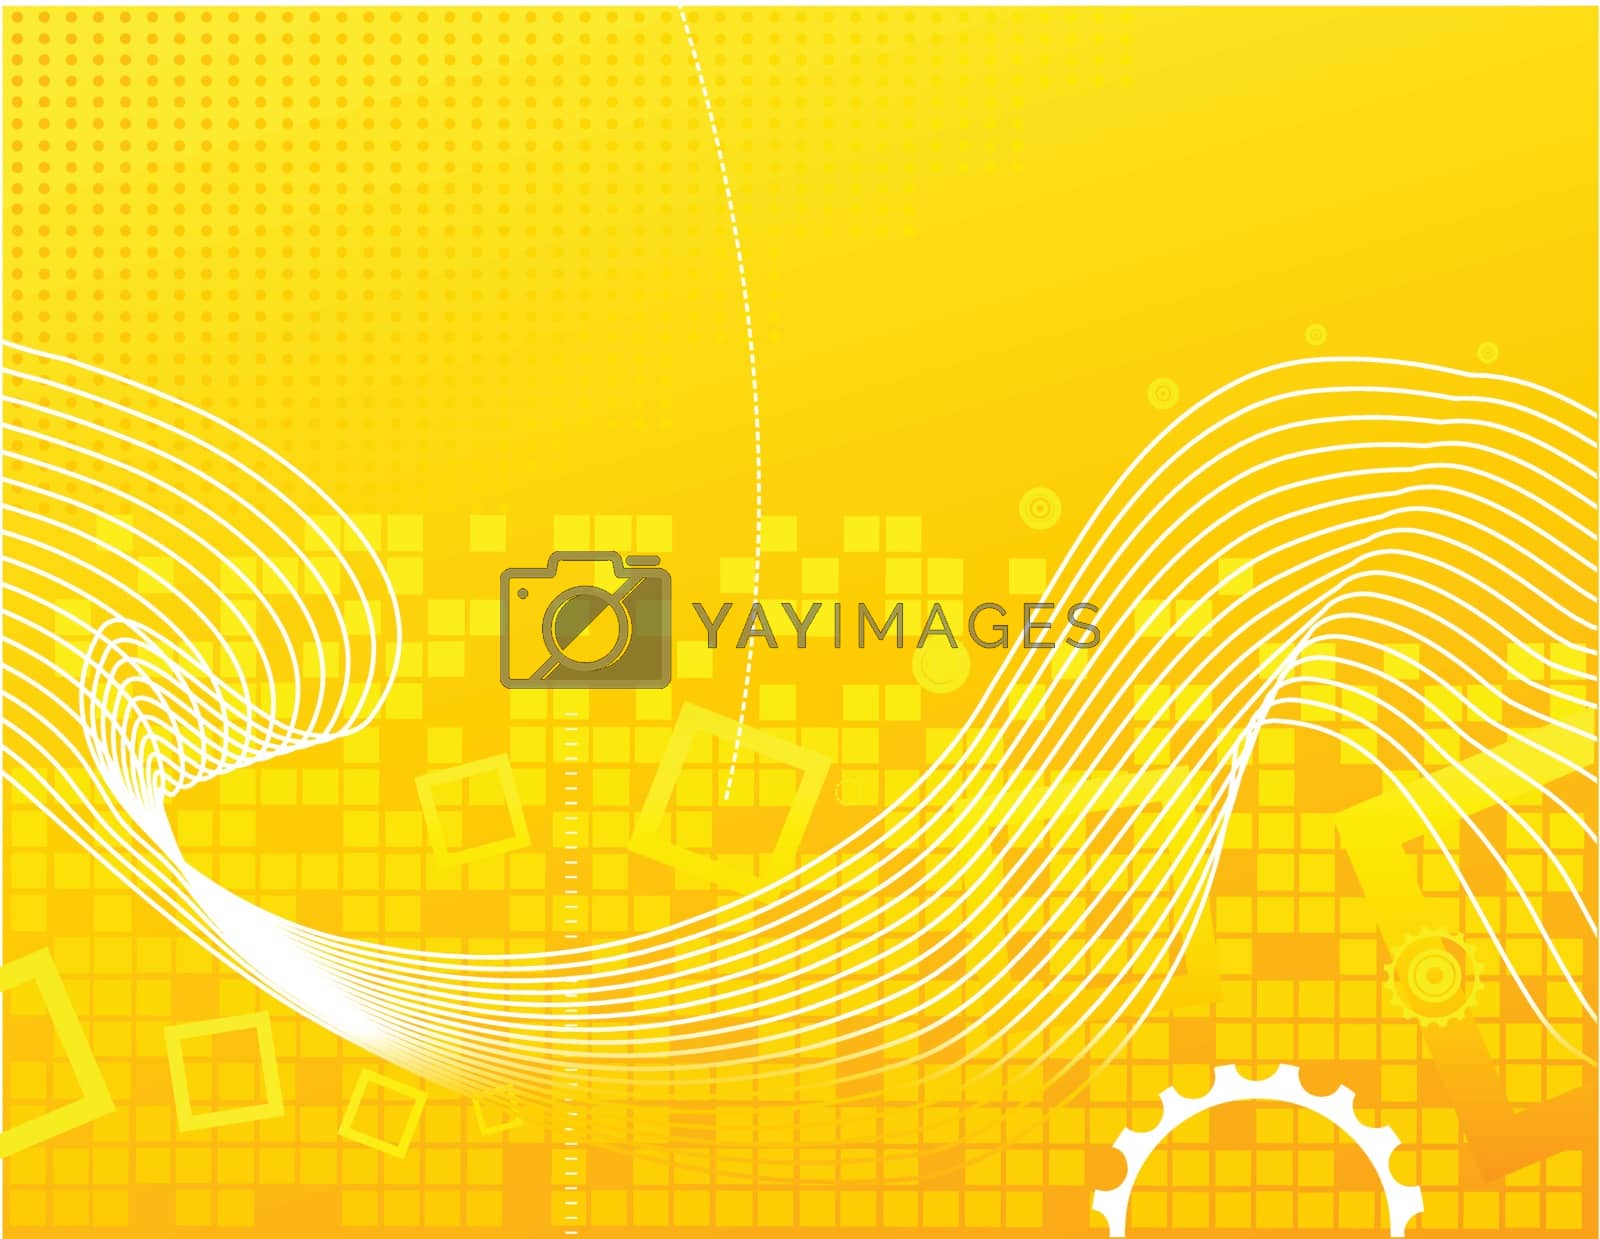 Royalty free image of high tech yellow background by artcalin